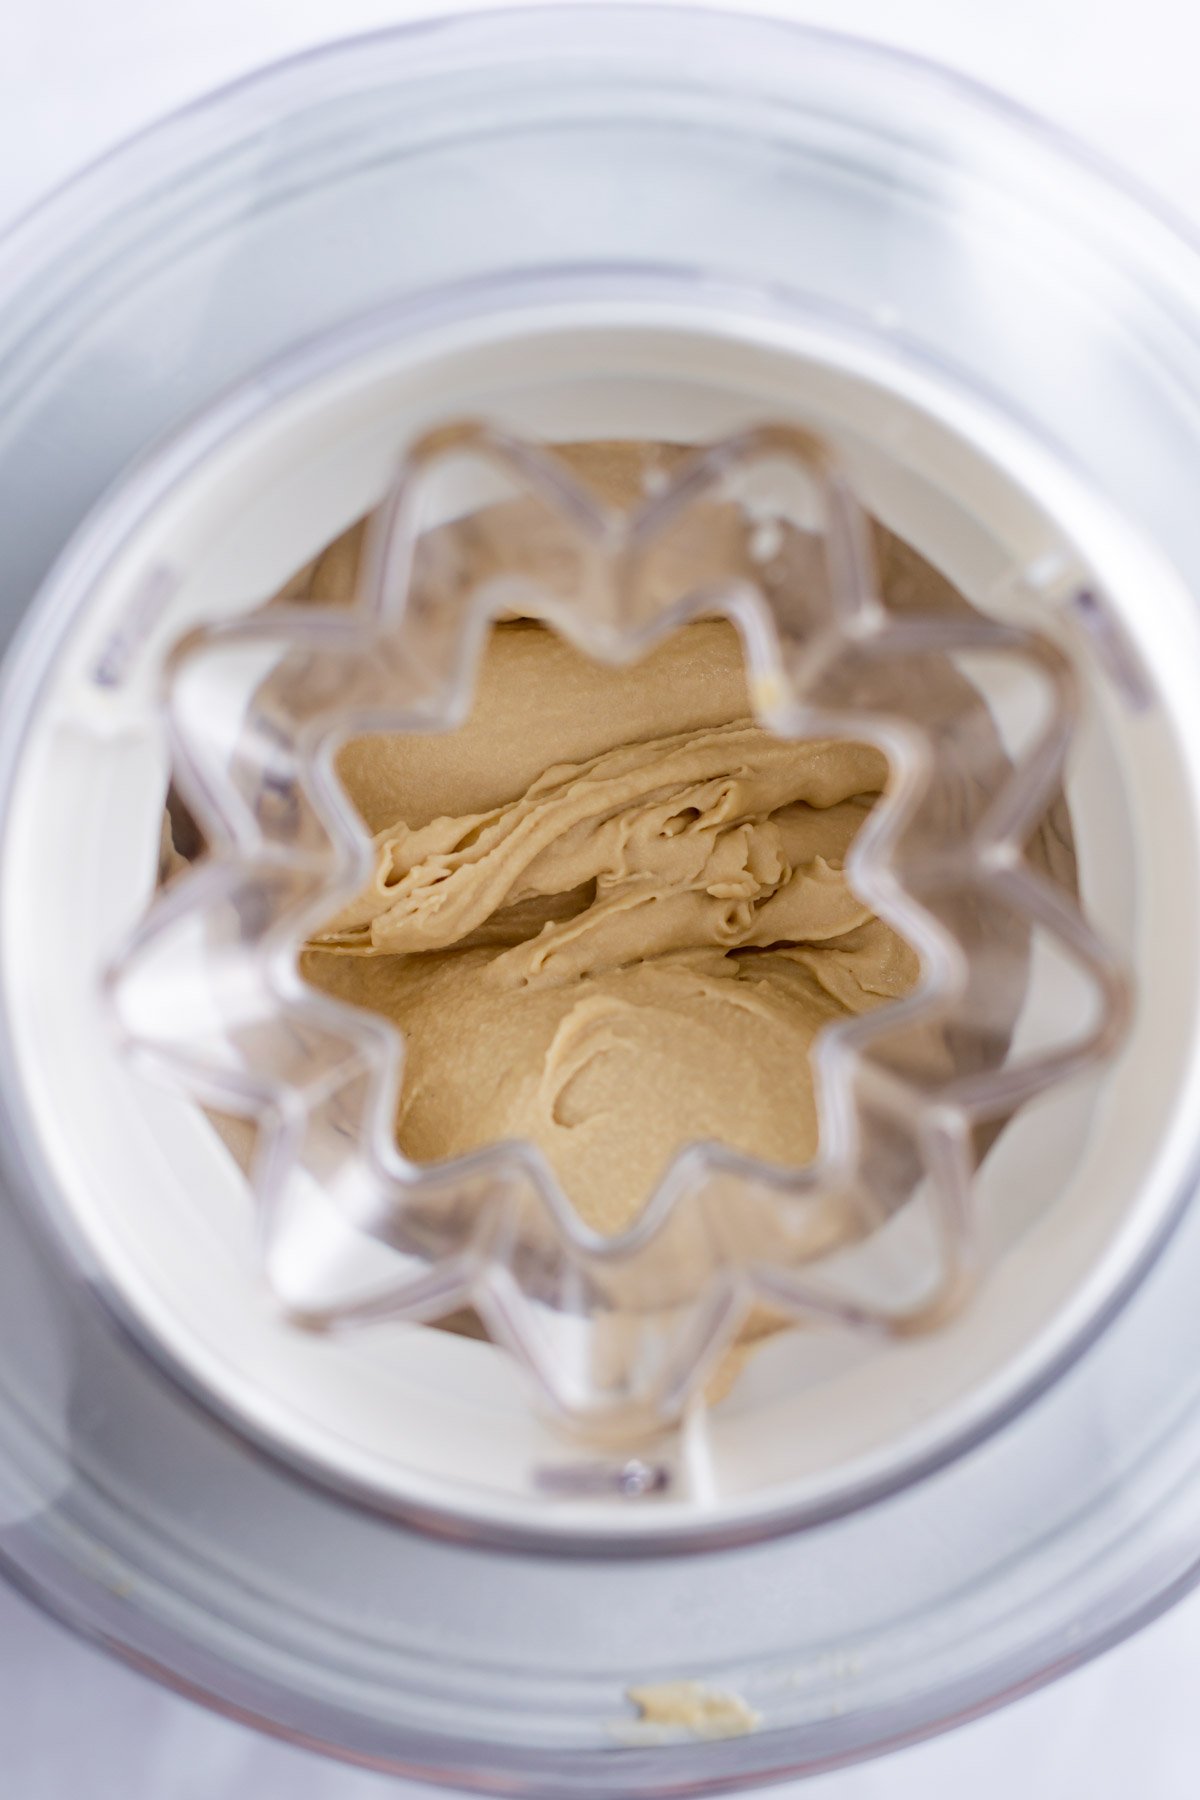 butterscotch ice cream churned in an ice cream maker